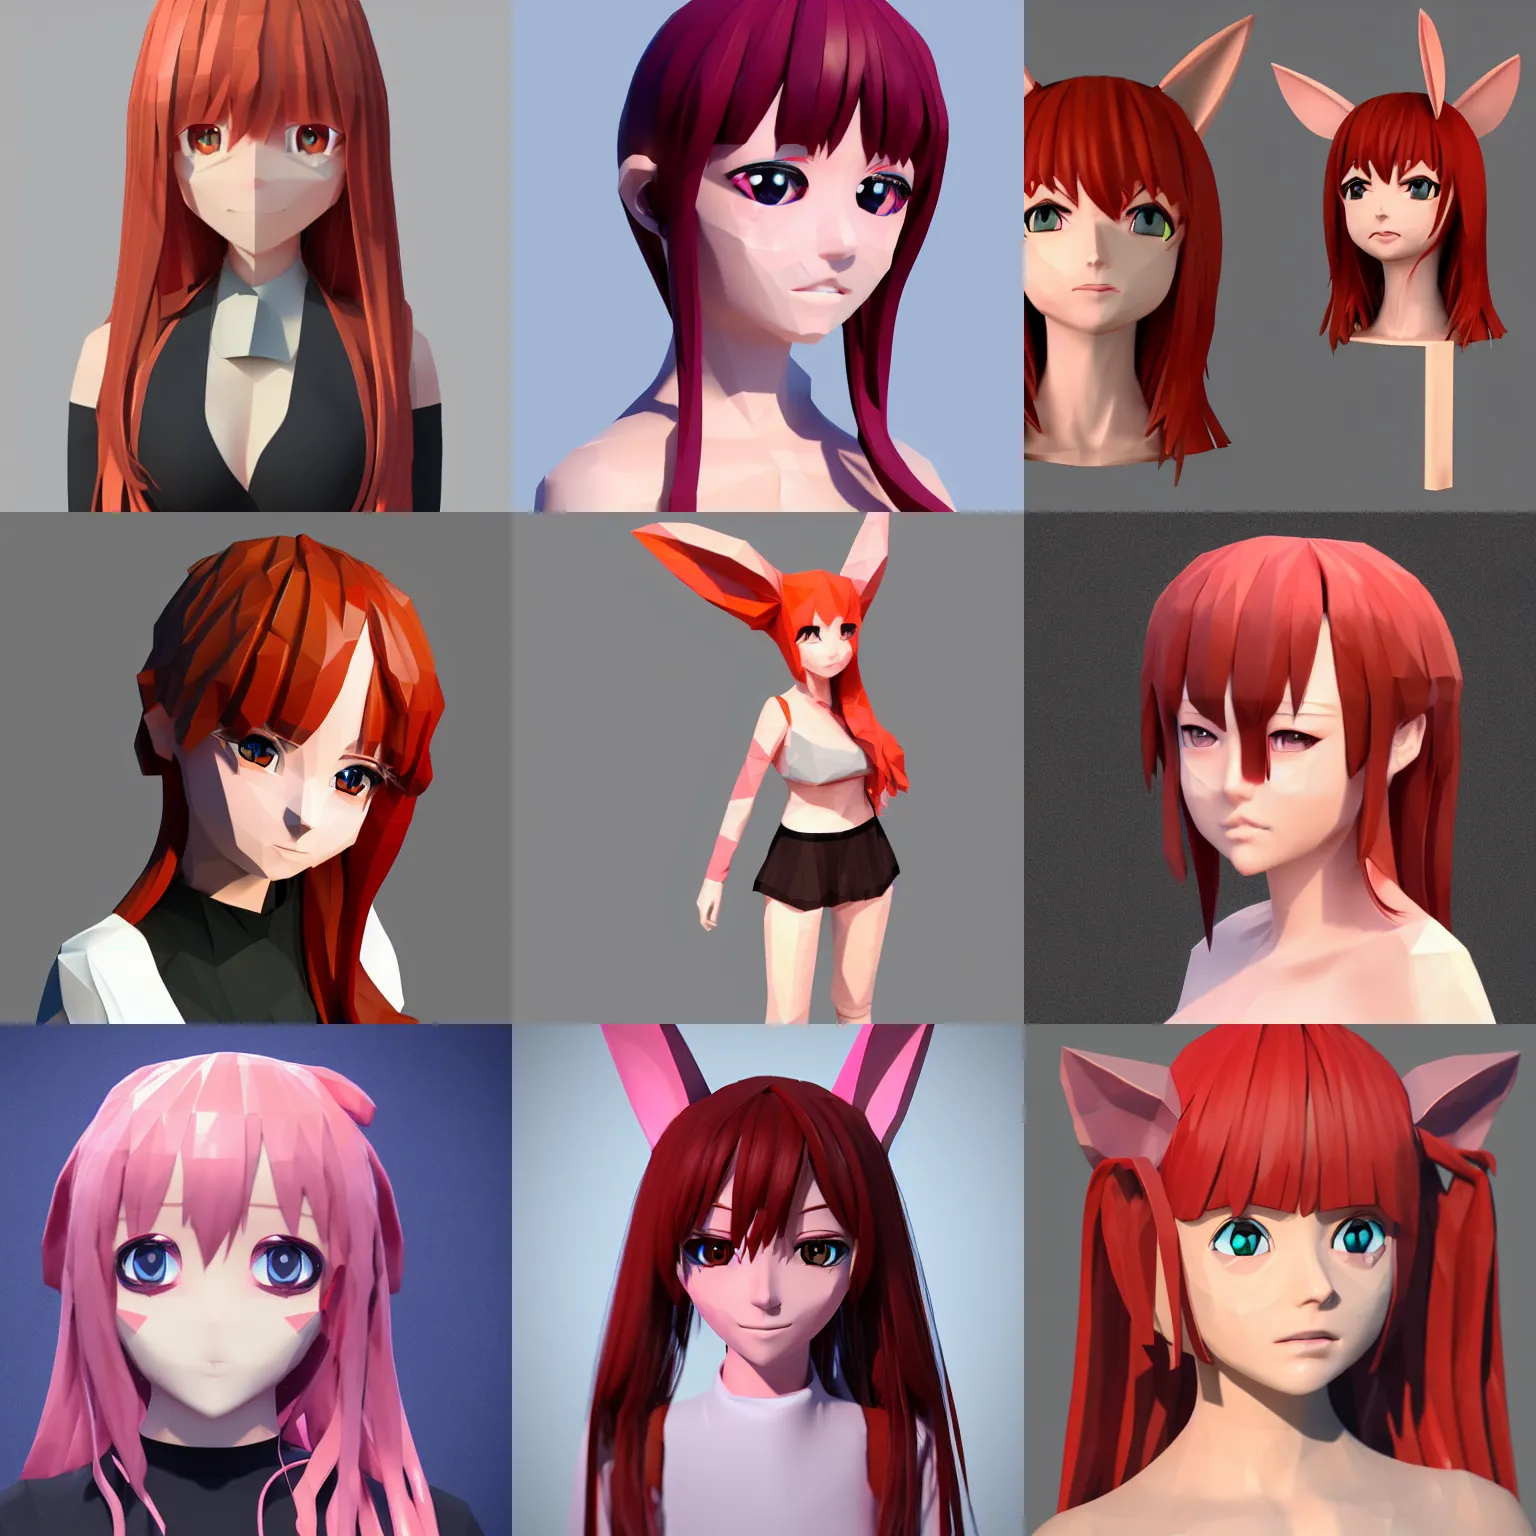 Anime Characters - A 3D model collection by fleshmobproductions - Sketchfab